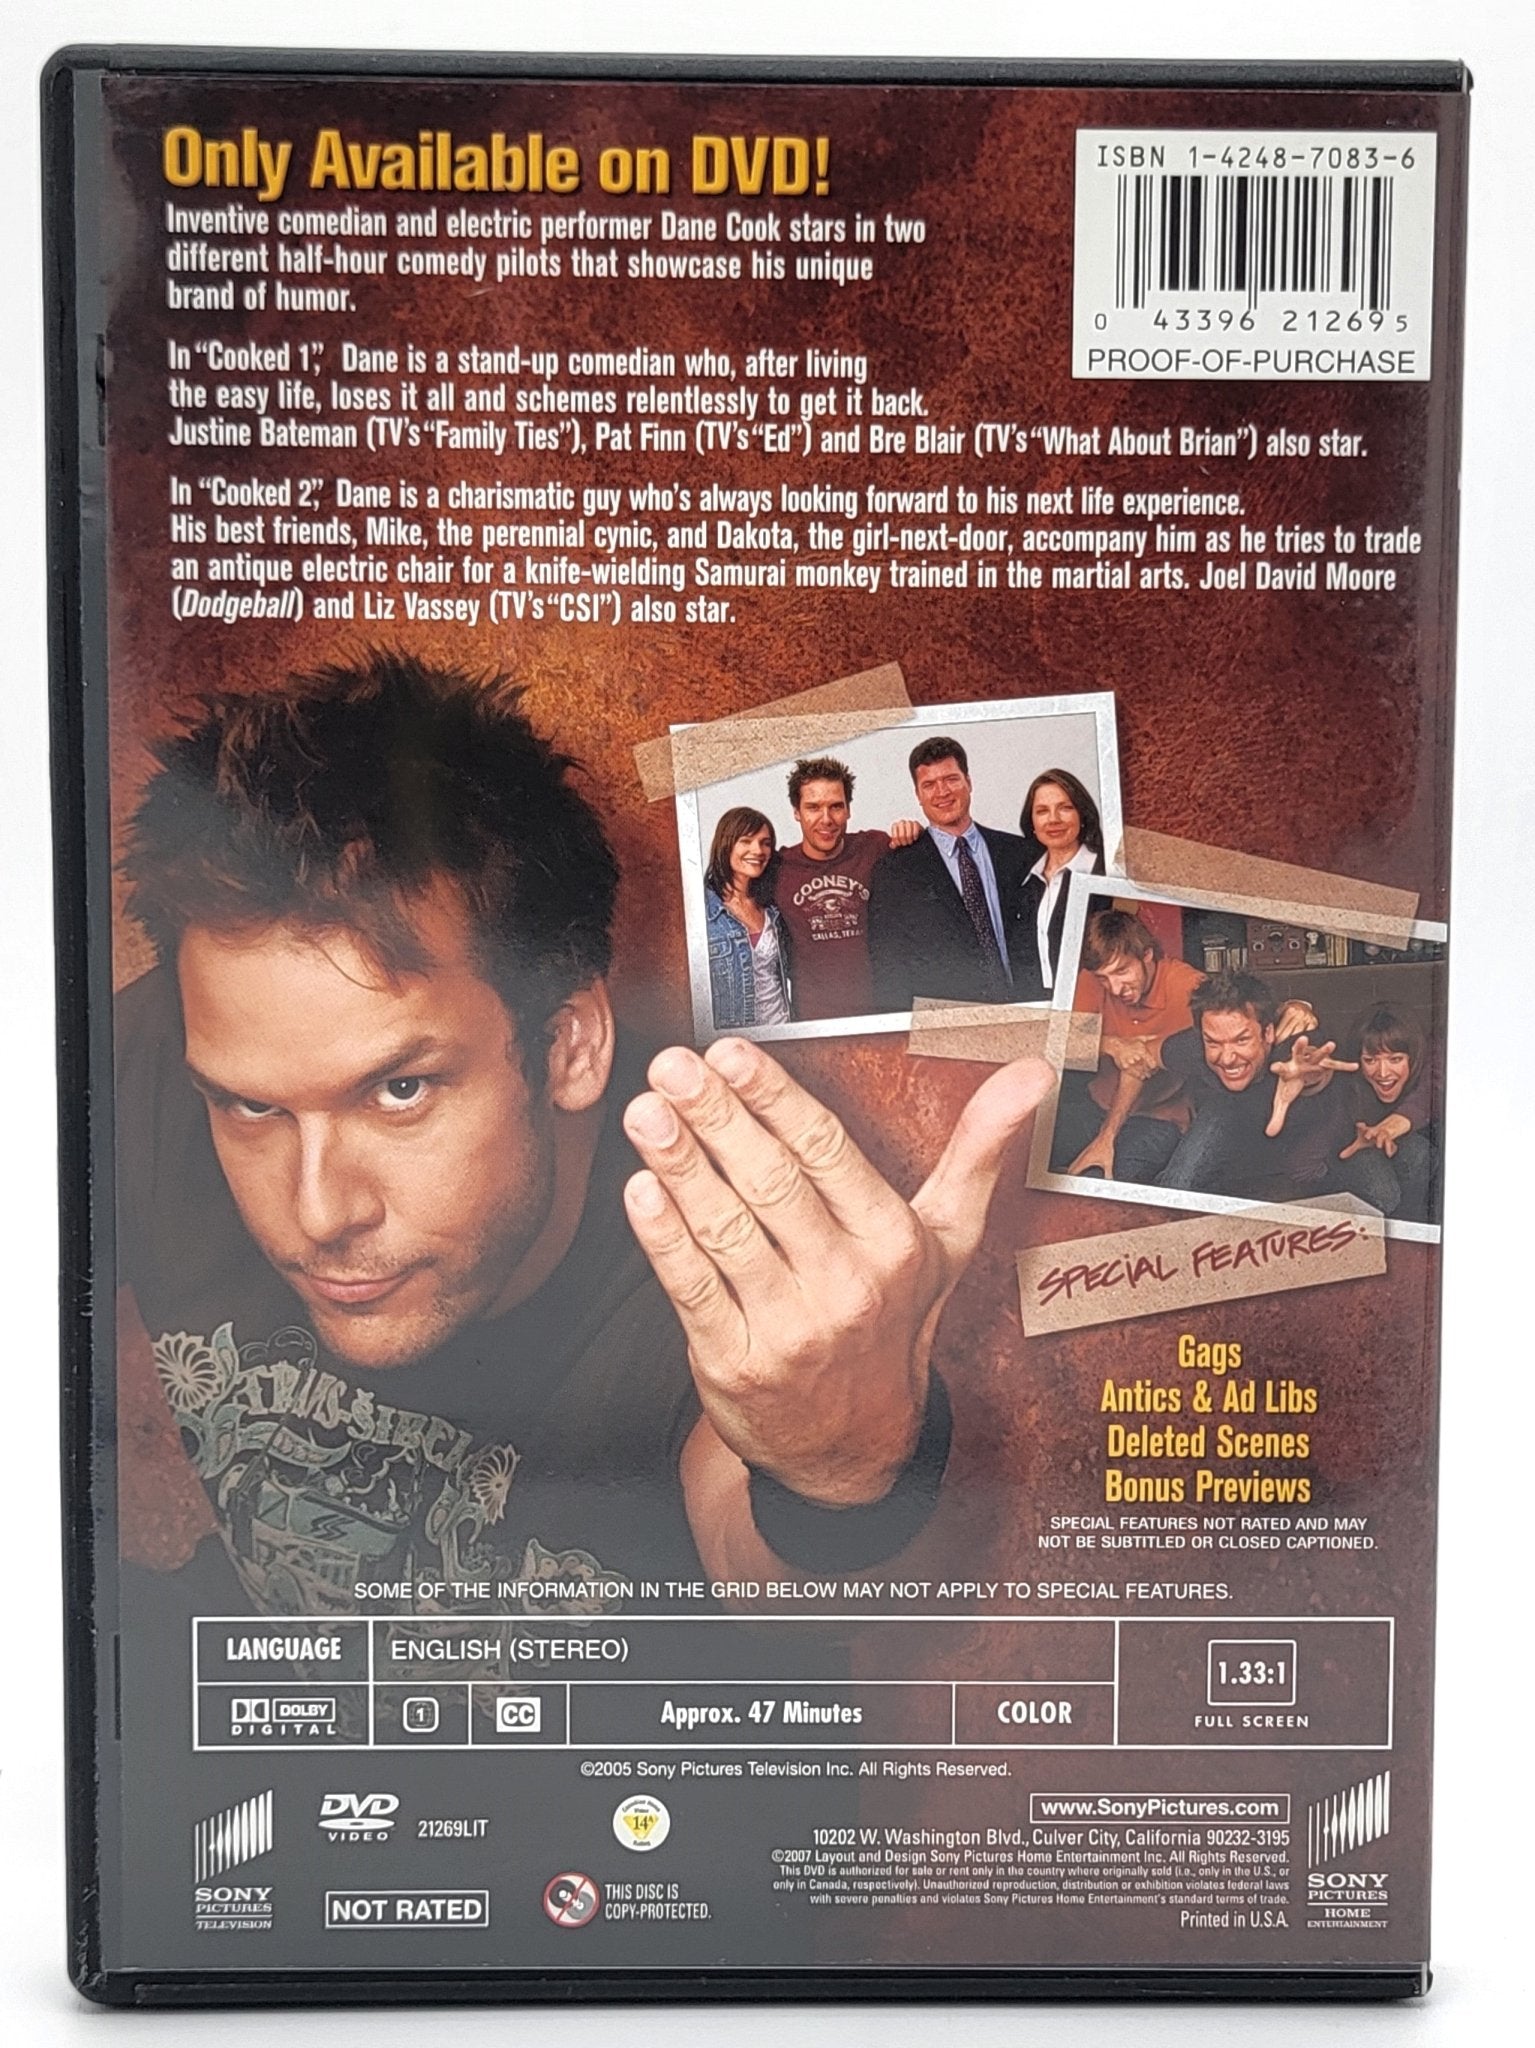 Sony Pictures Home Entertainment - Dane Cook - the Lost Pilots | DVD | Full Screen with Bonus Features - DVD - Steady Bunny Shop